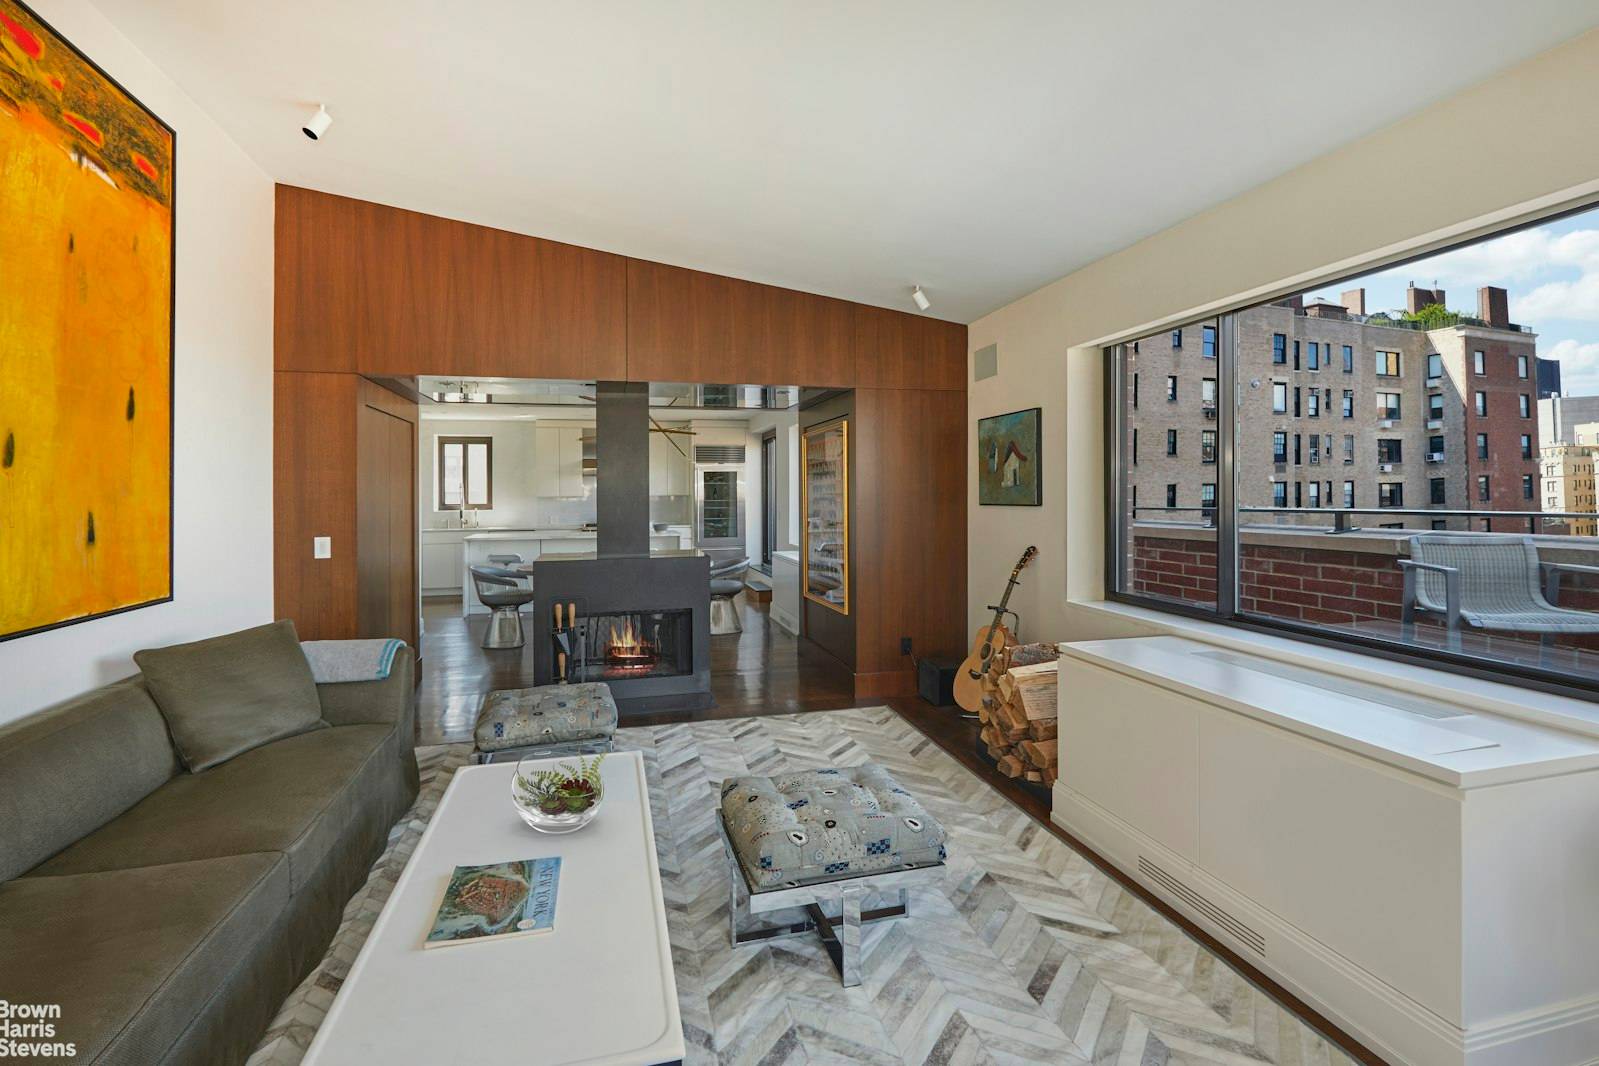 Penthouse 15B is an elegant, light filled duplex home with over 1, 735 SF of gracious living space.